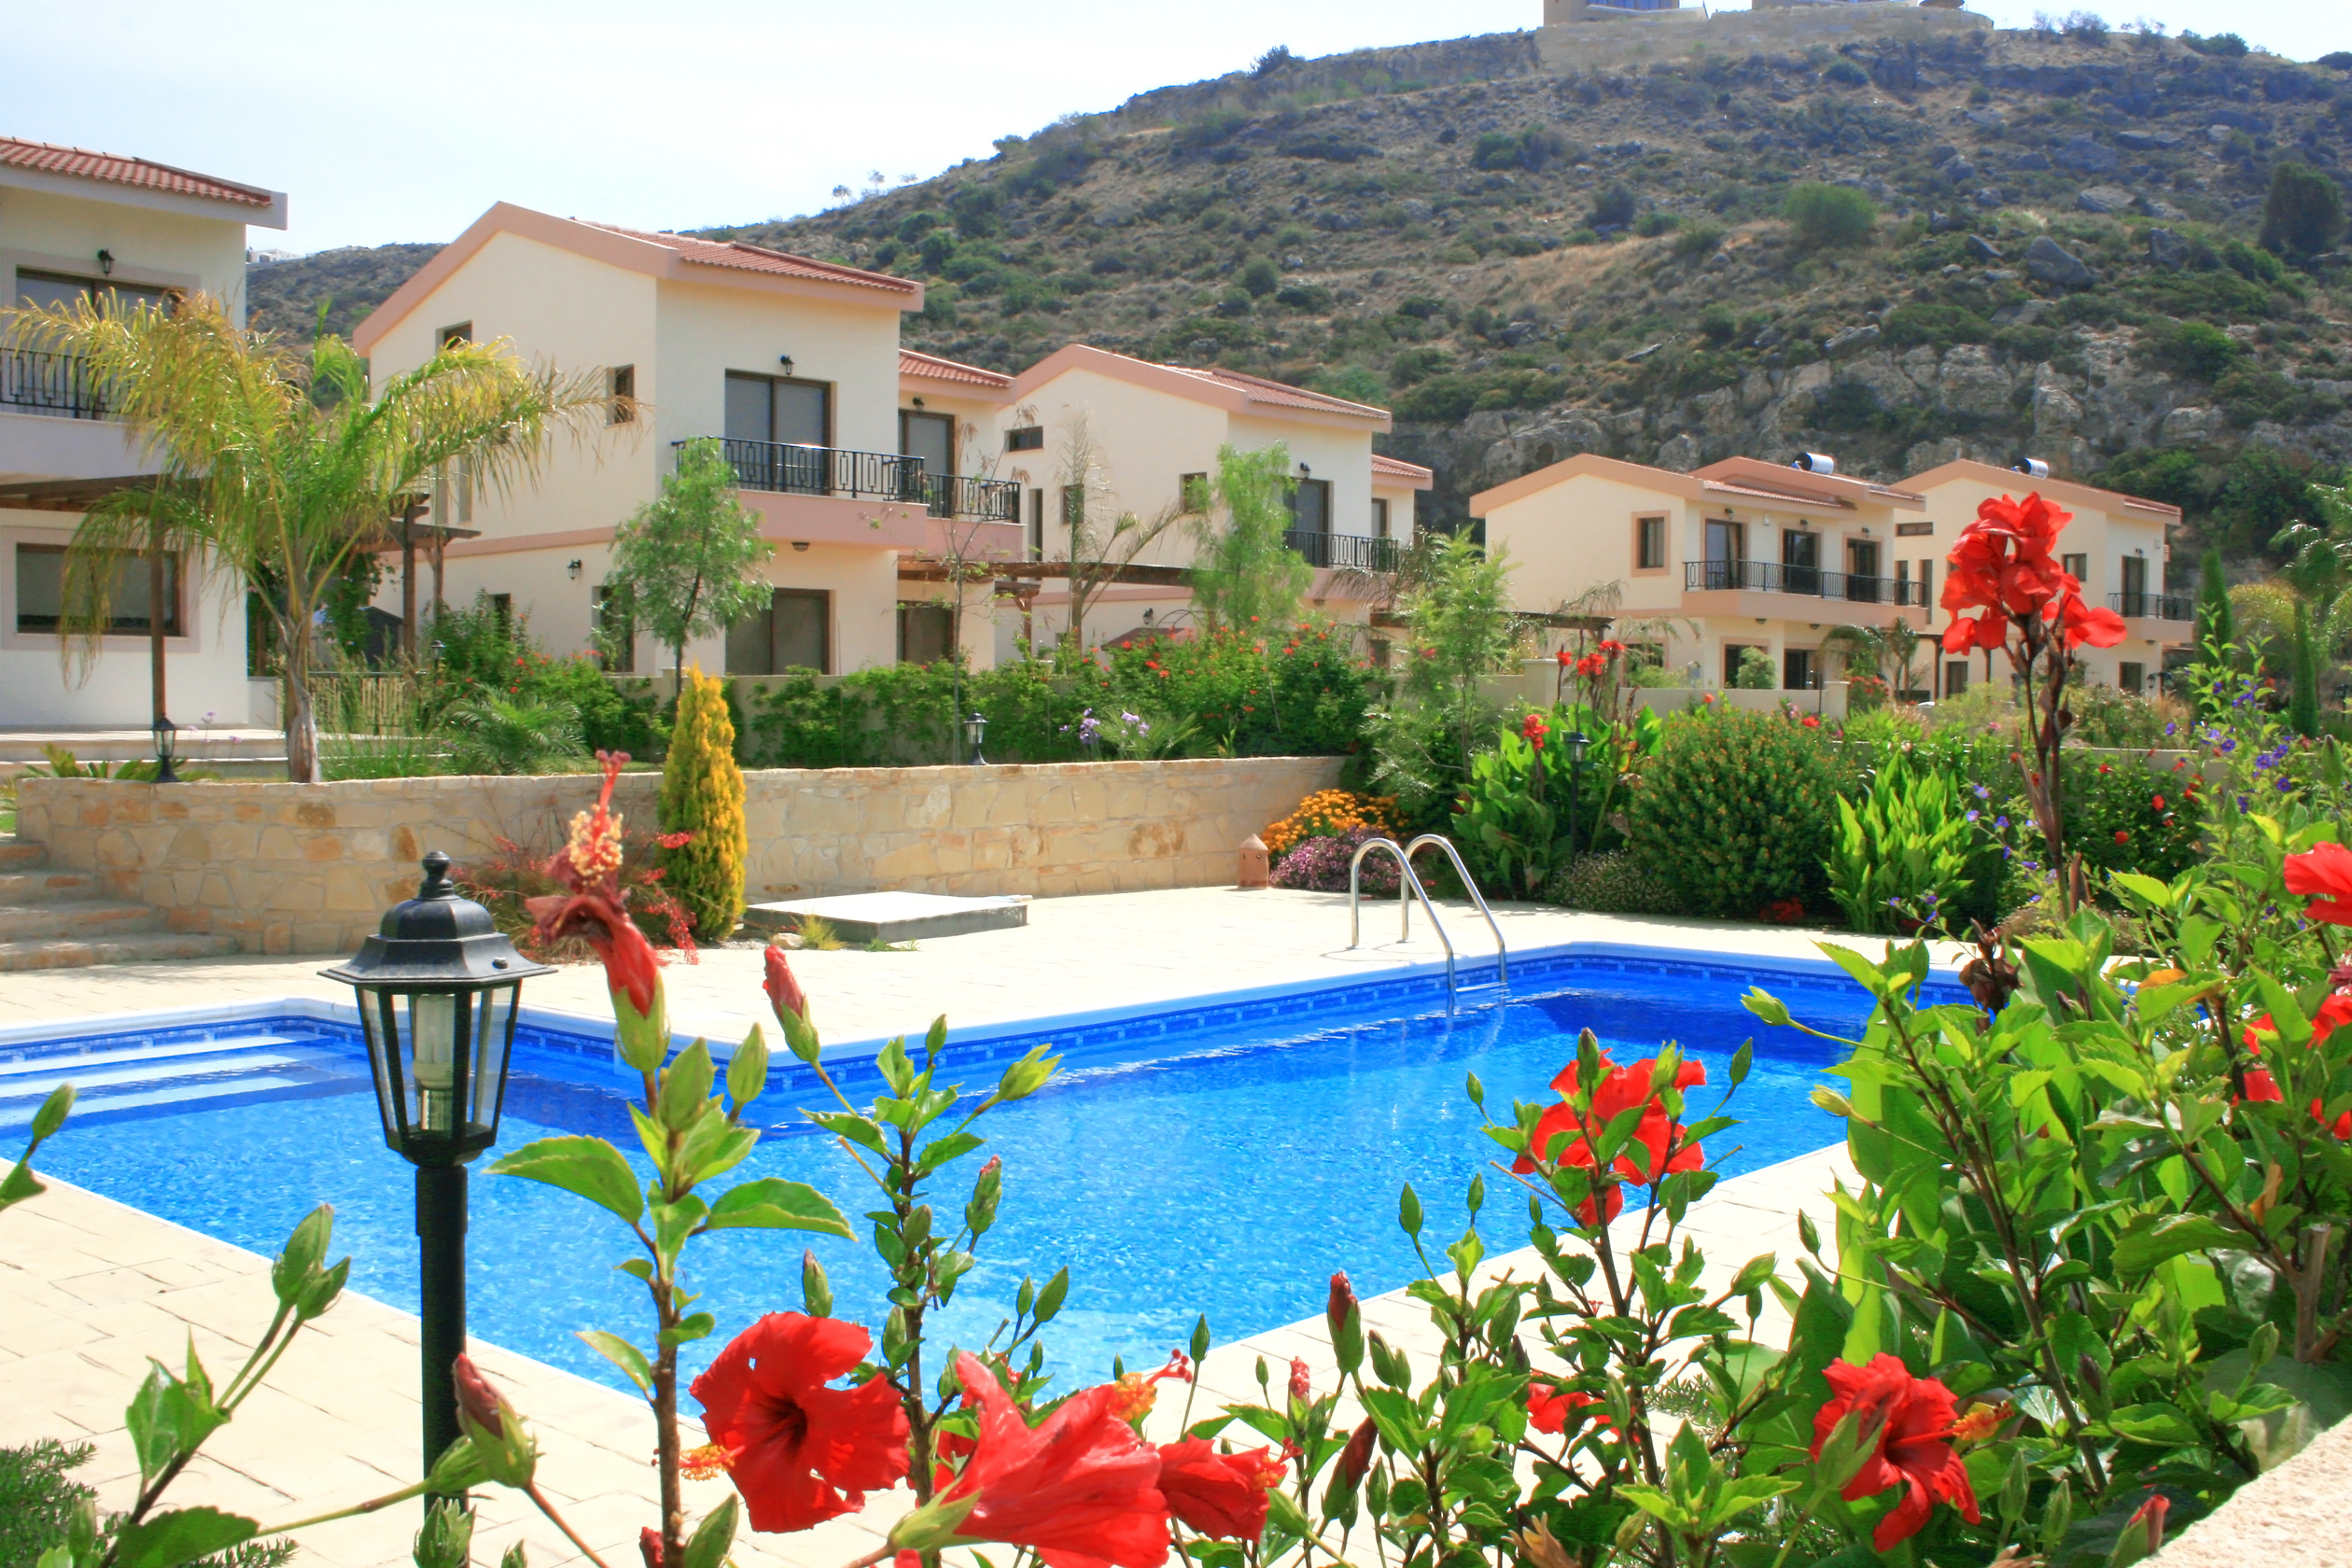 Vibrant red flowers adorning the poolside area, adding a pop of color and natural beauty to the pool's surroundings.